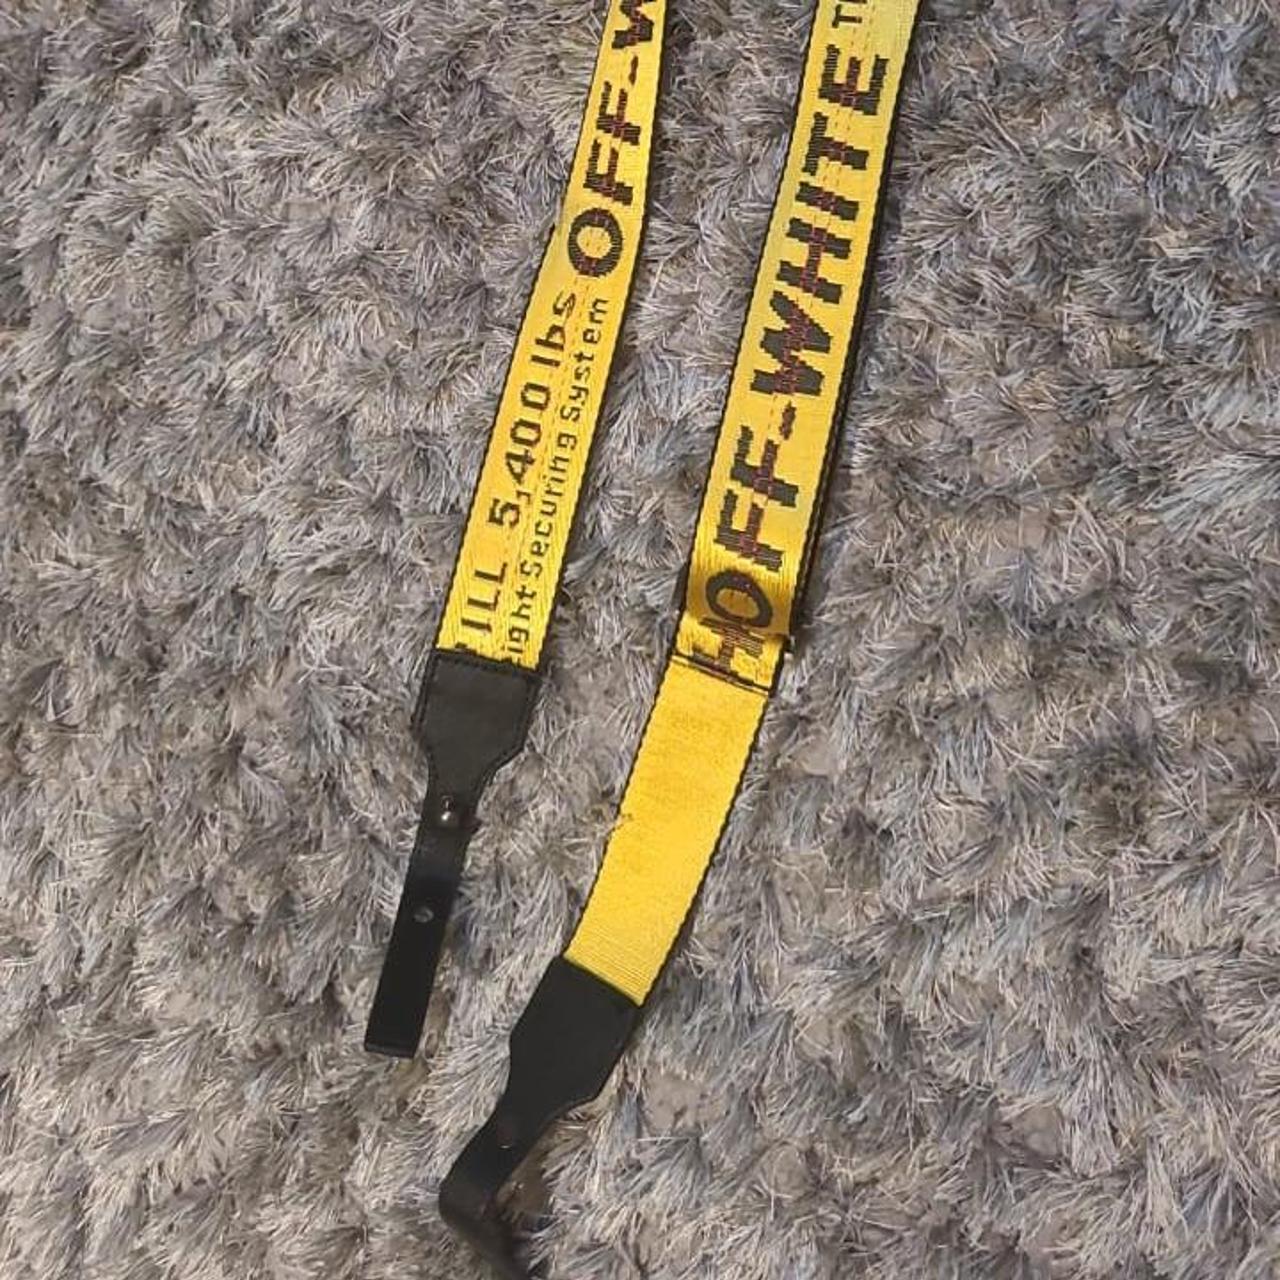 Off-White Men's Black and Yellow Bag | Depop